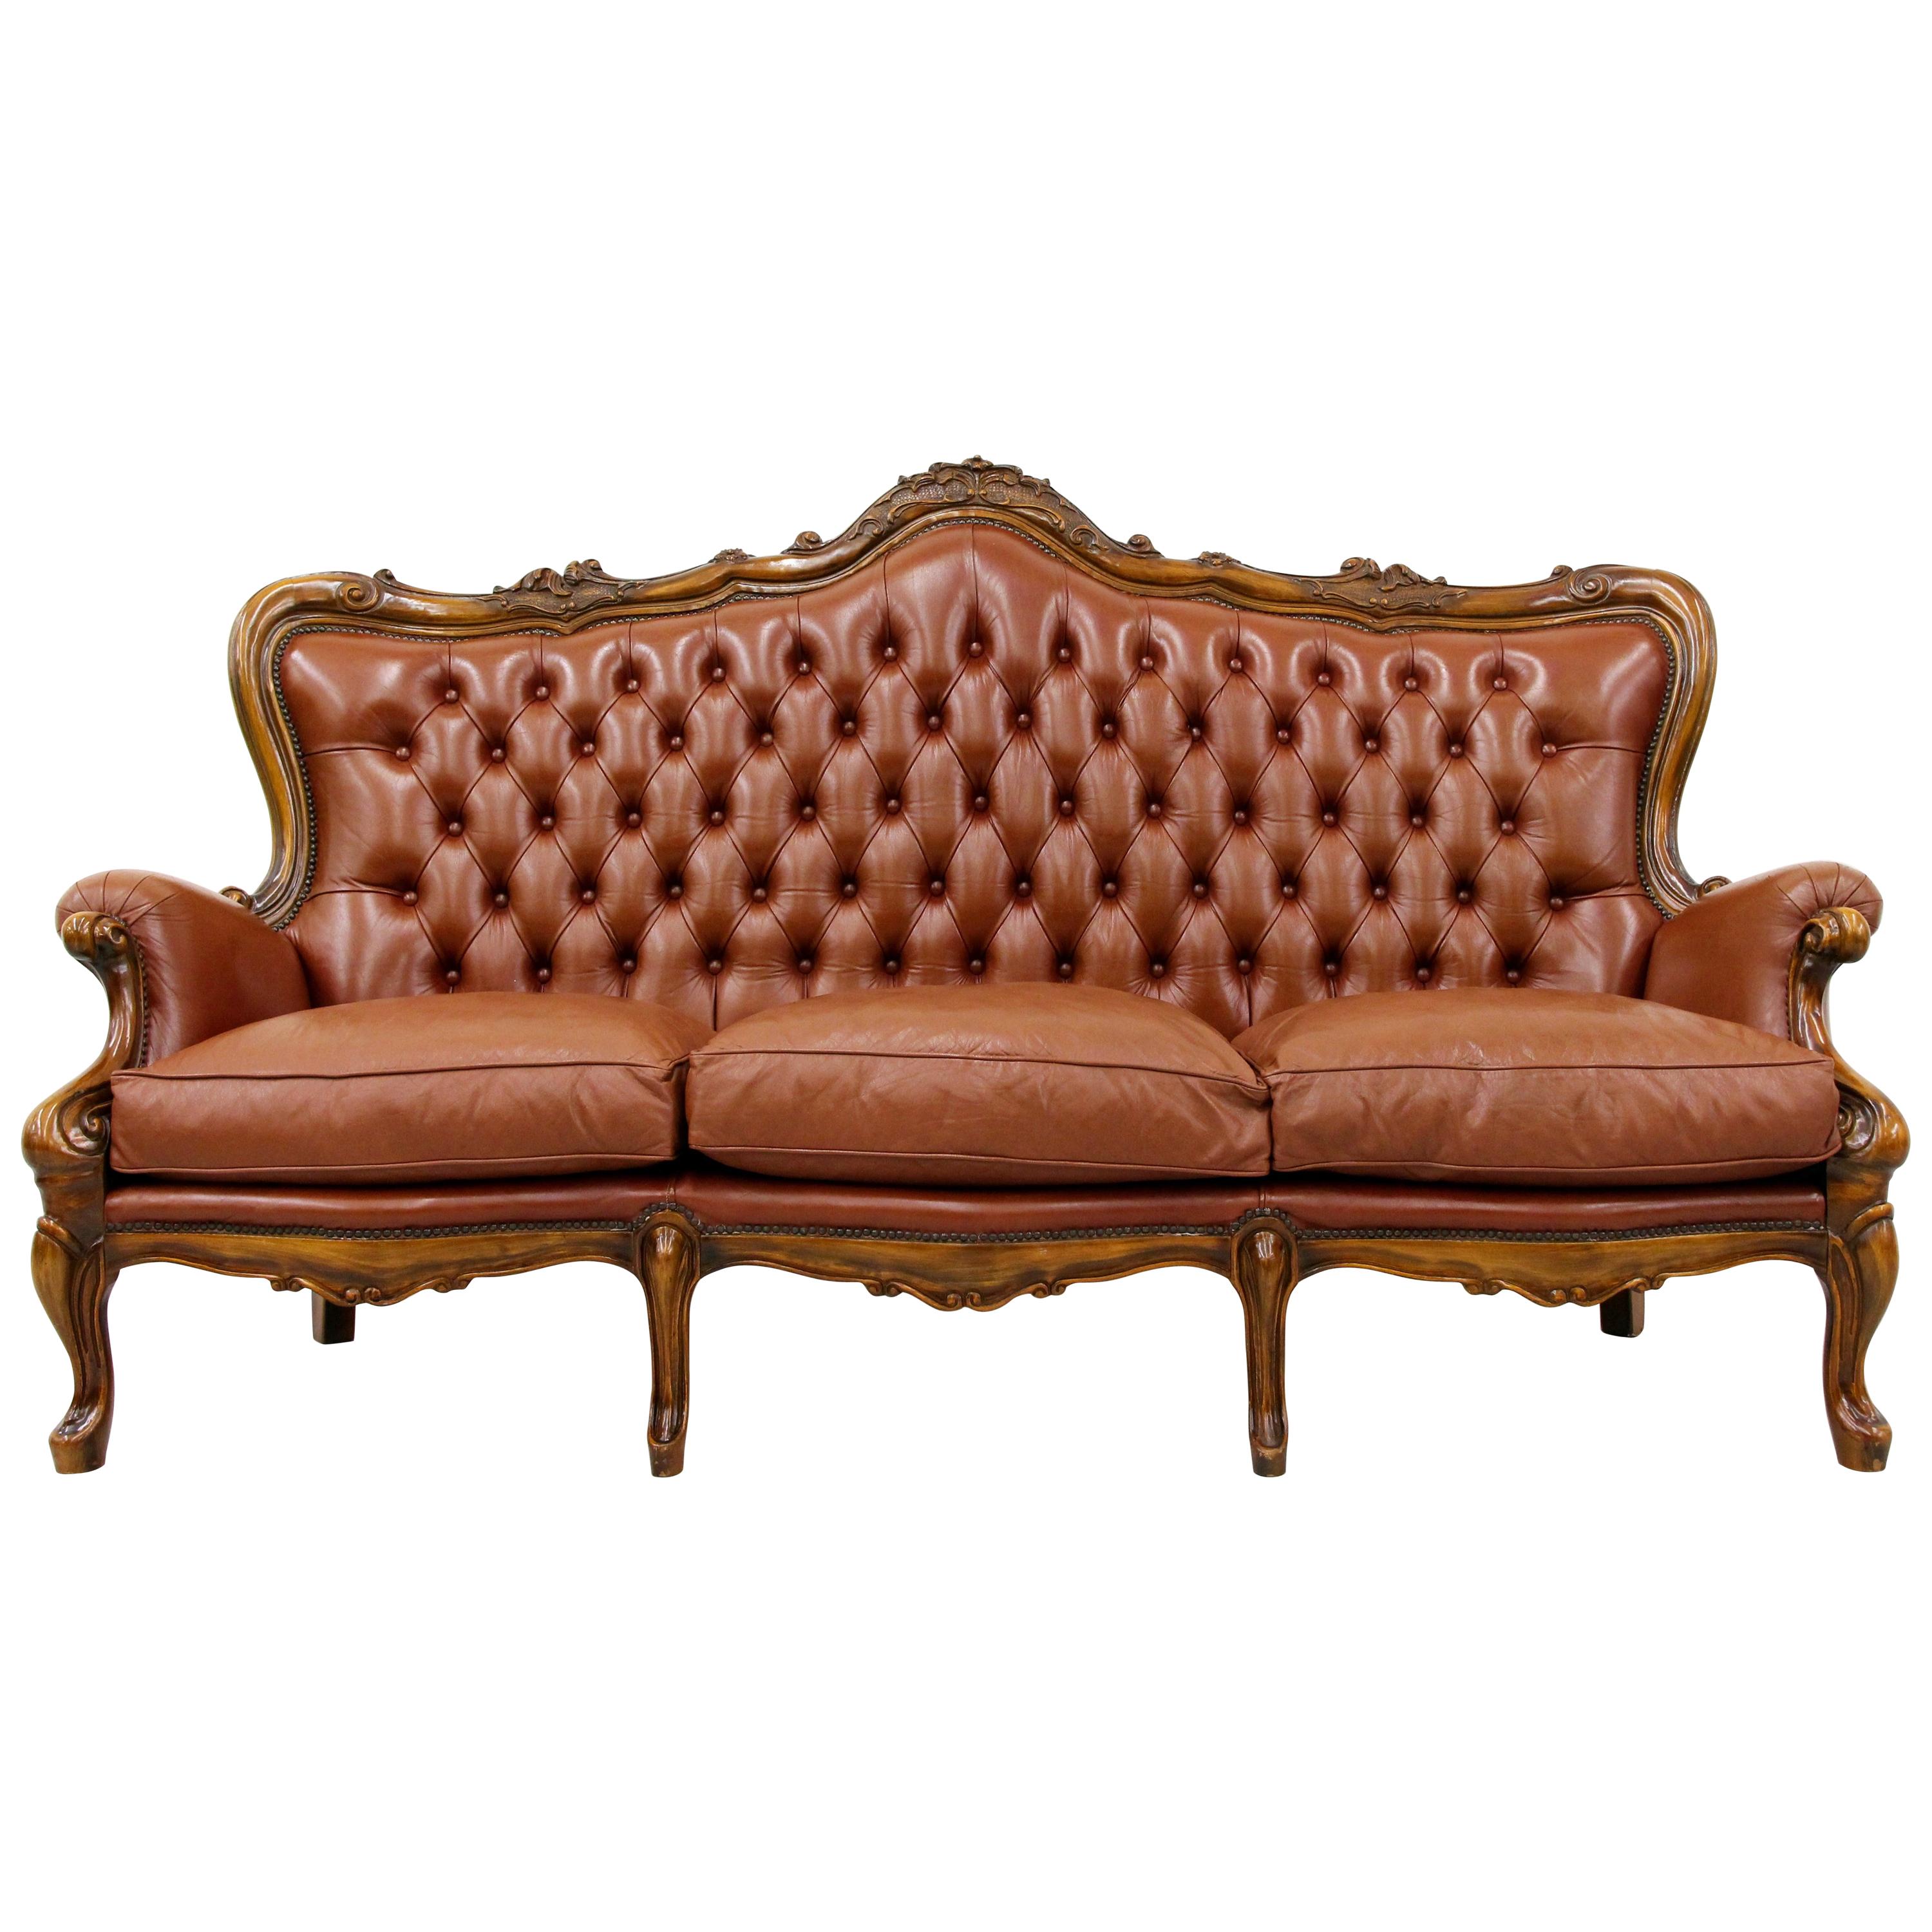 Chippendale Chesterfield Sofa Leather Antique Vintage Couch English For Sale